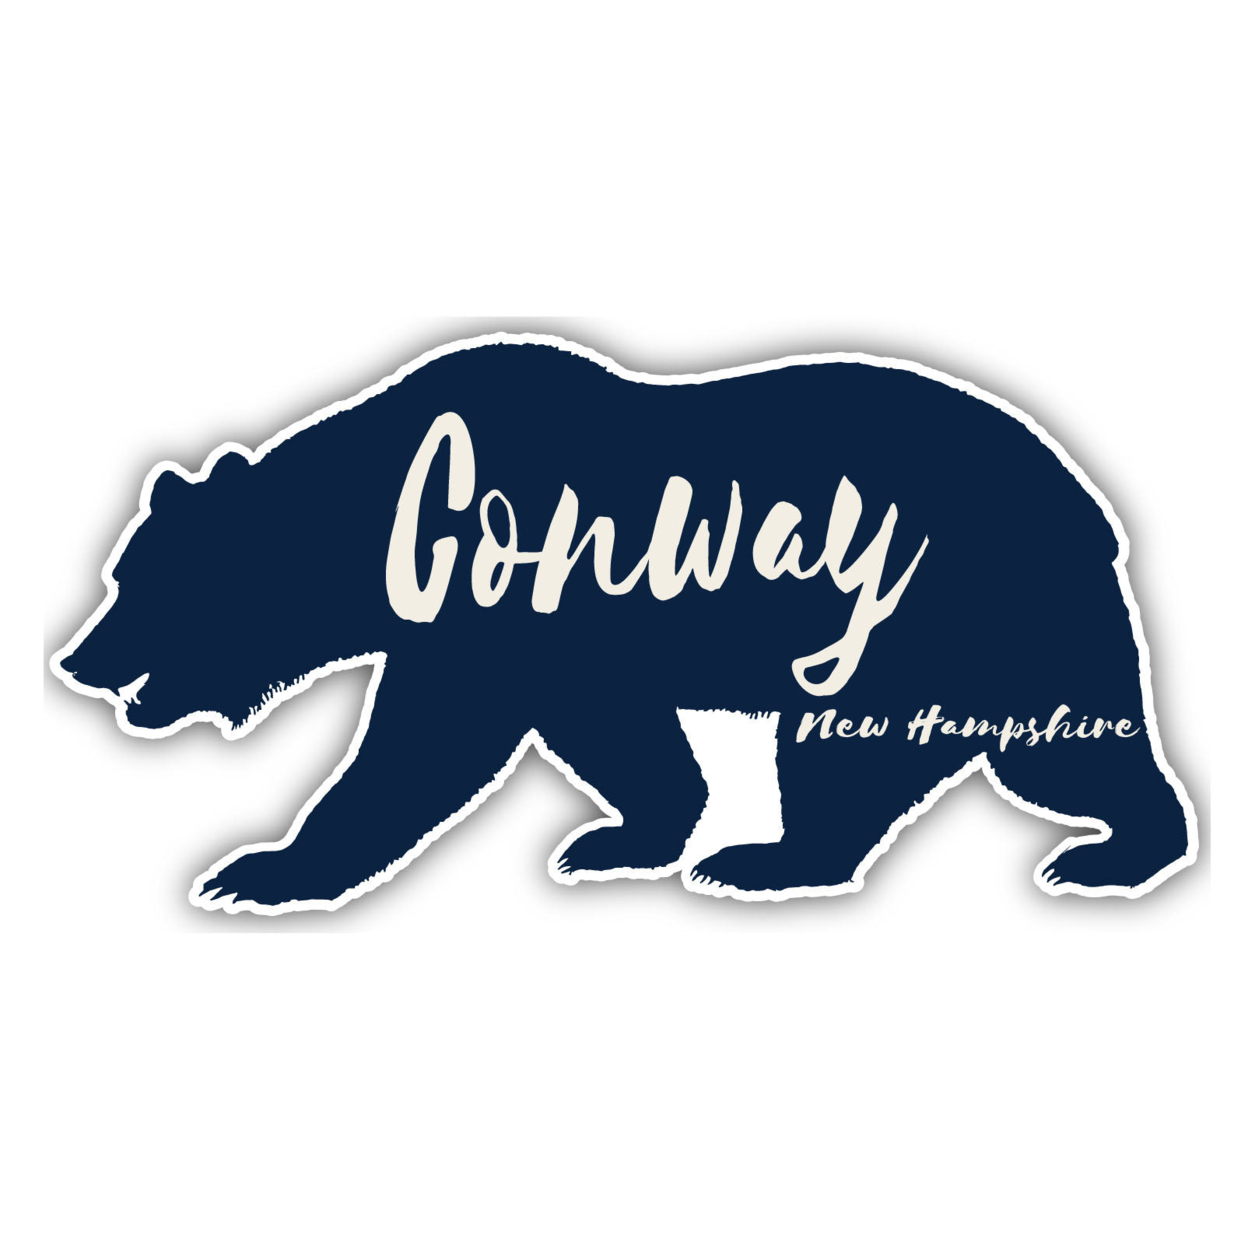 Conway New Hampshire Souvenir Decorative Stickers (Choose Theme And Size) - 4-Pack, 12-Inch, Bear